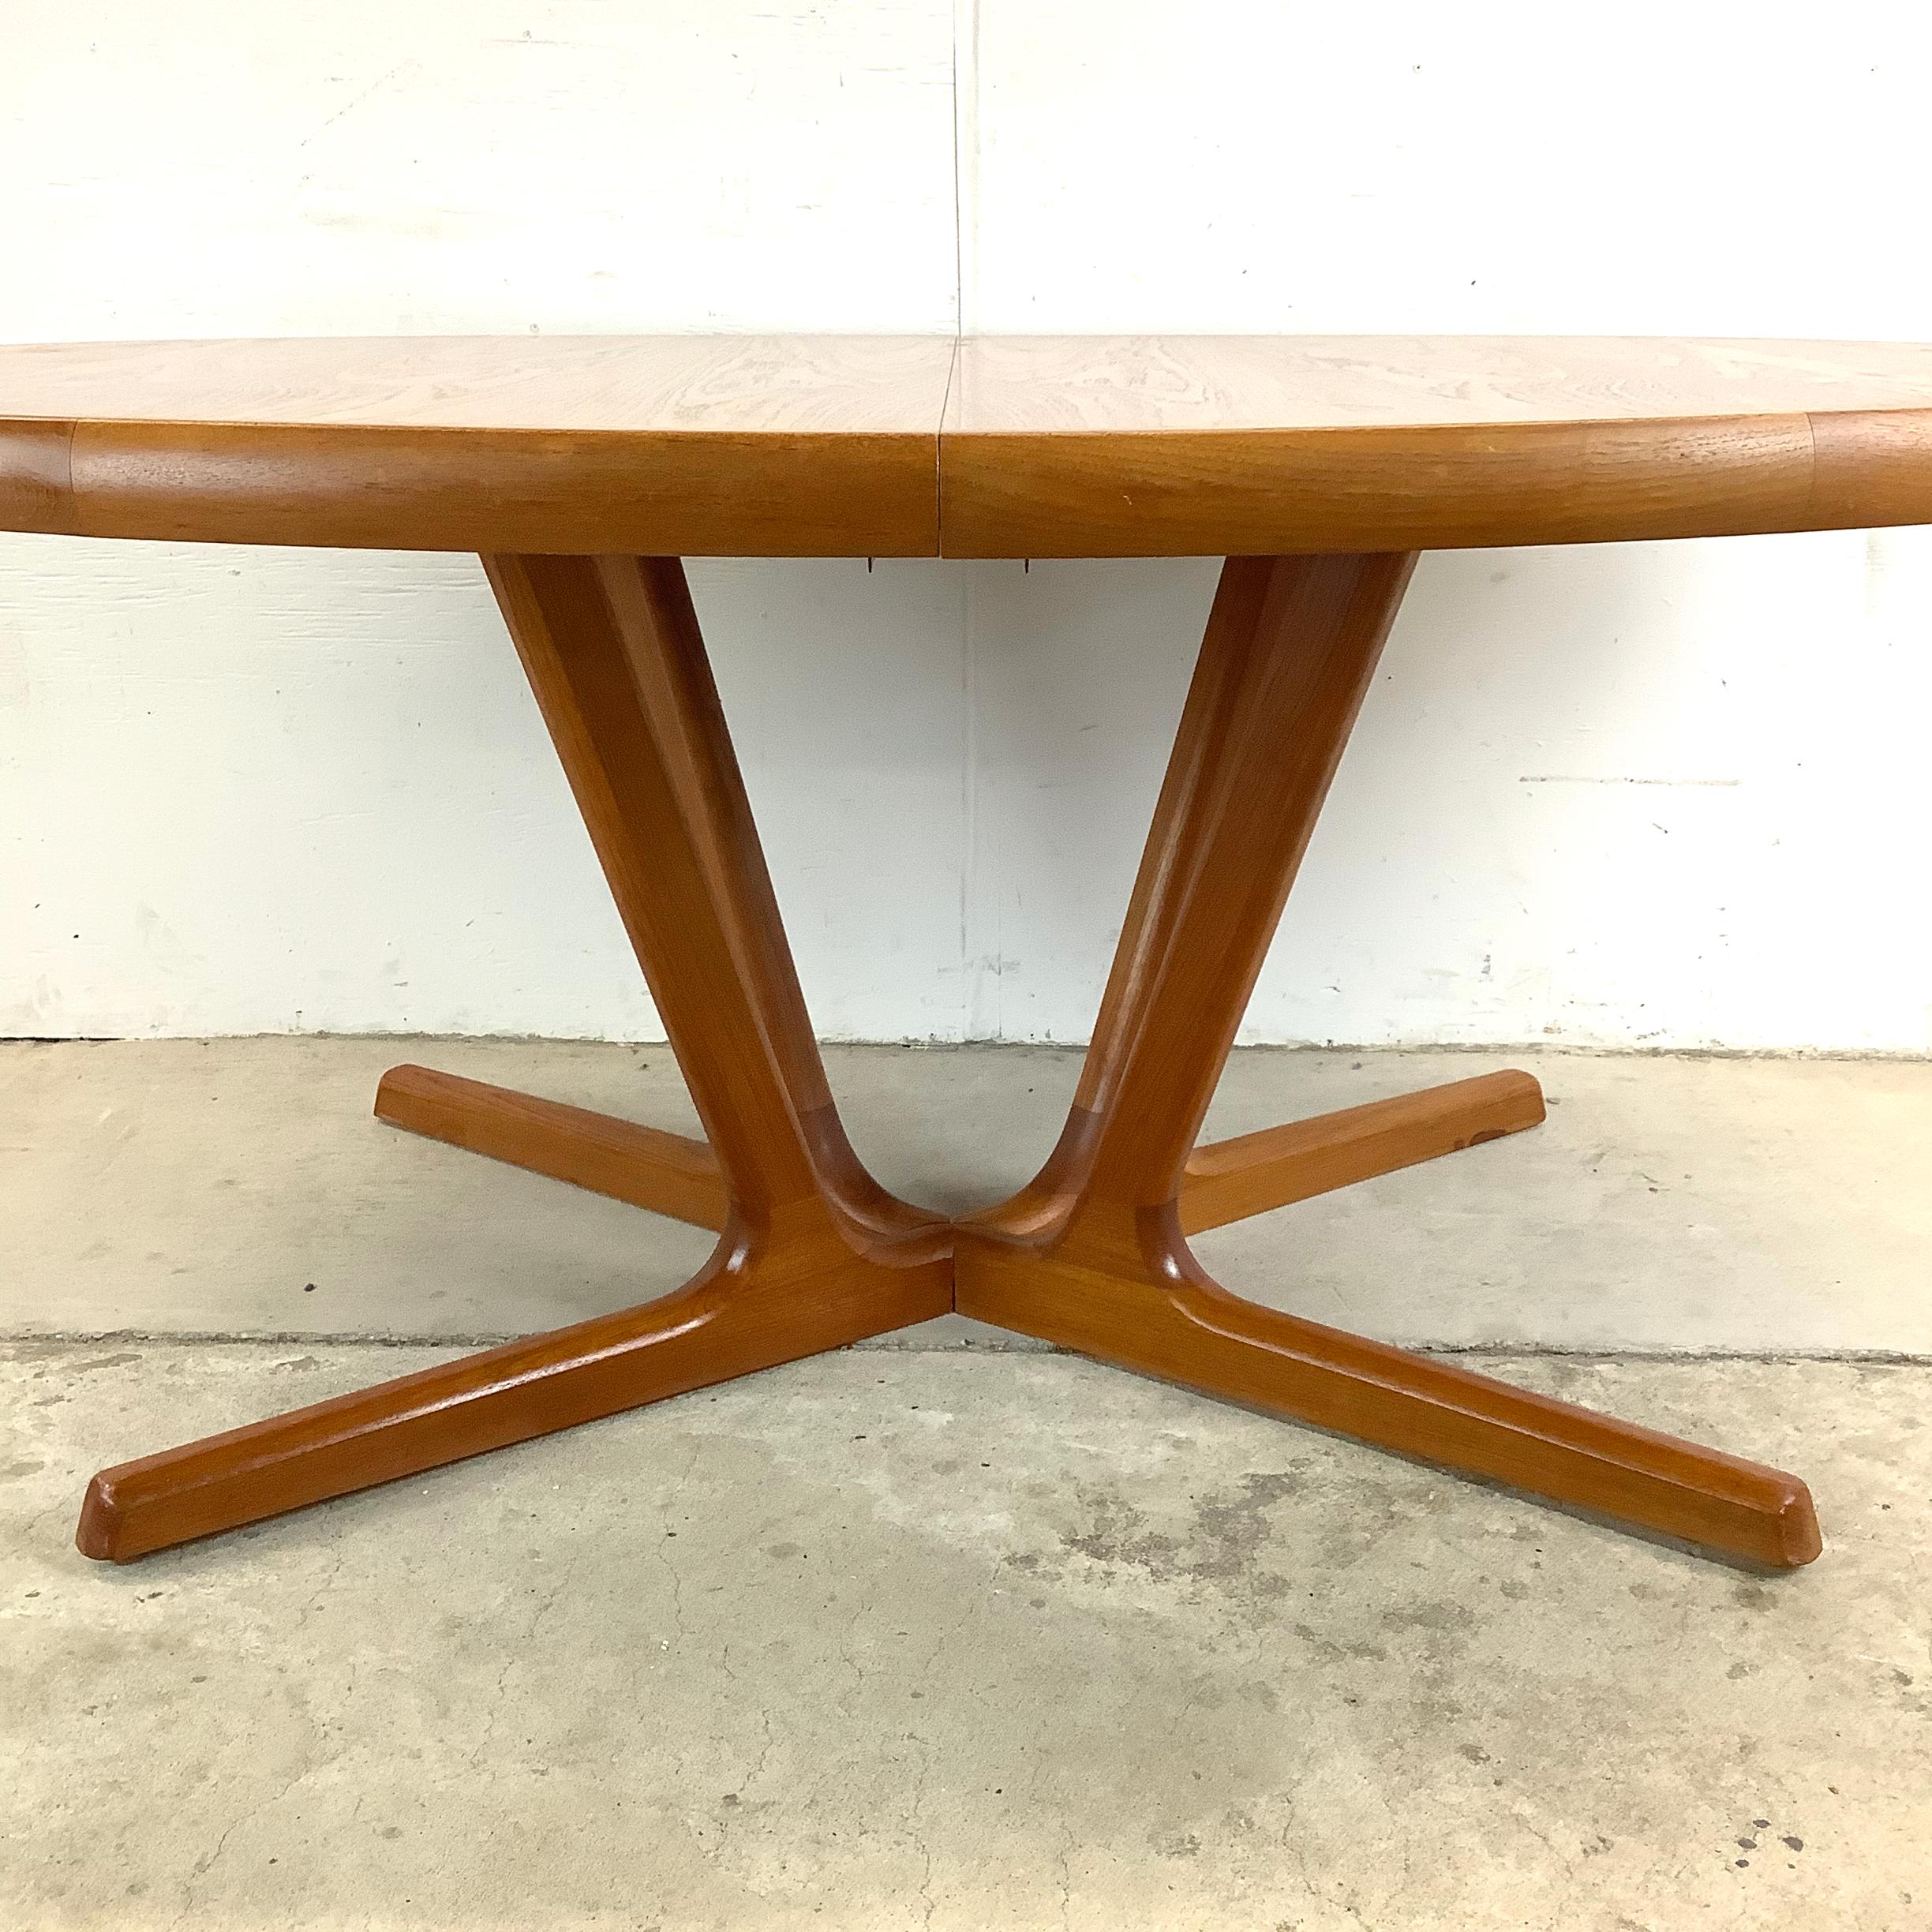 Wood Scandinavian Modern Teak Oval Dining Table With Leaves For Sale